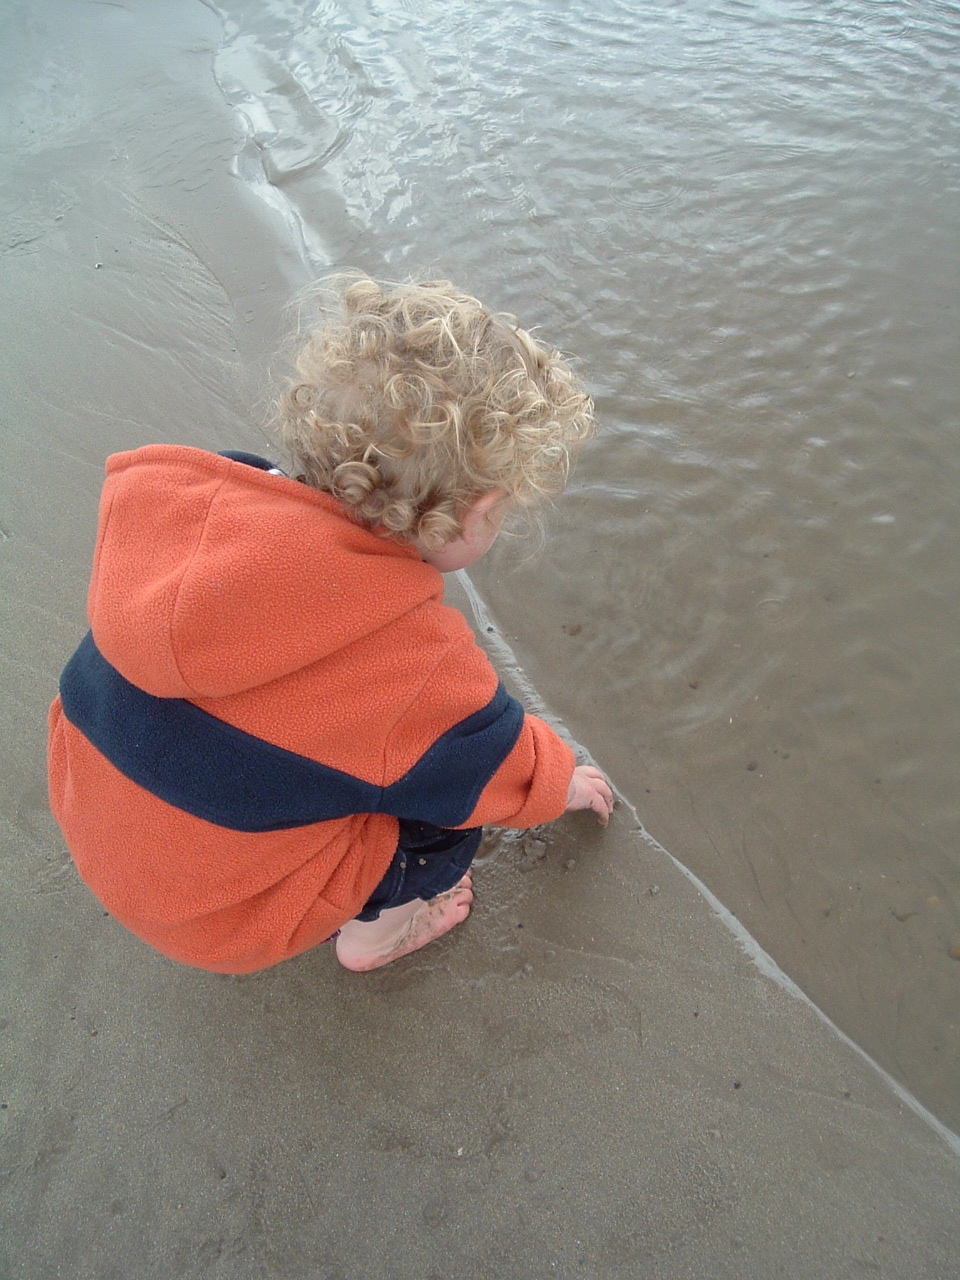 [youghal+paddy+at+water.jpg]